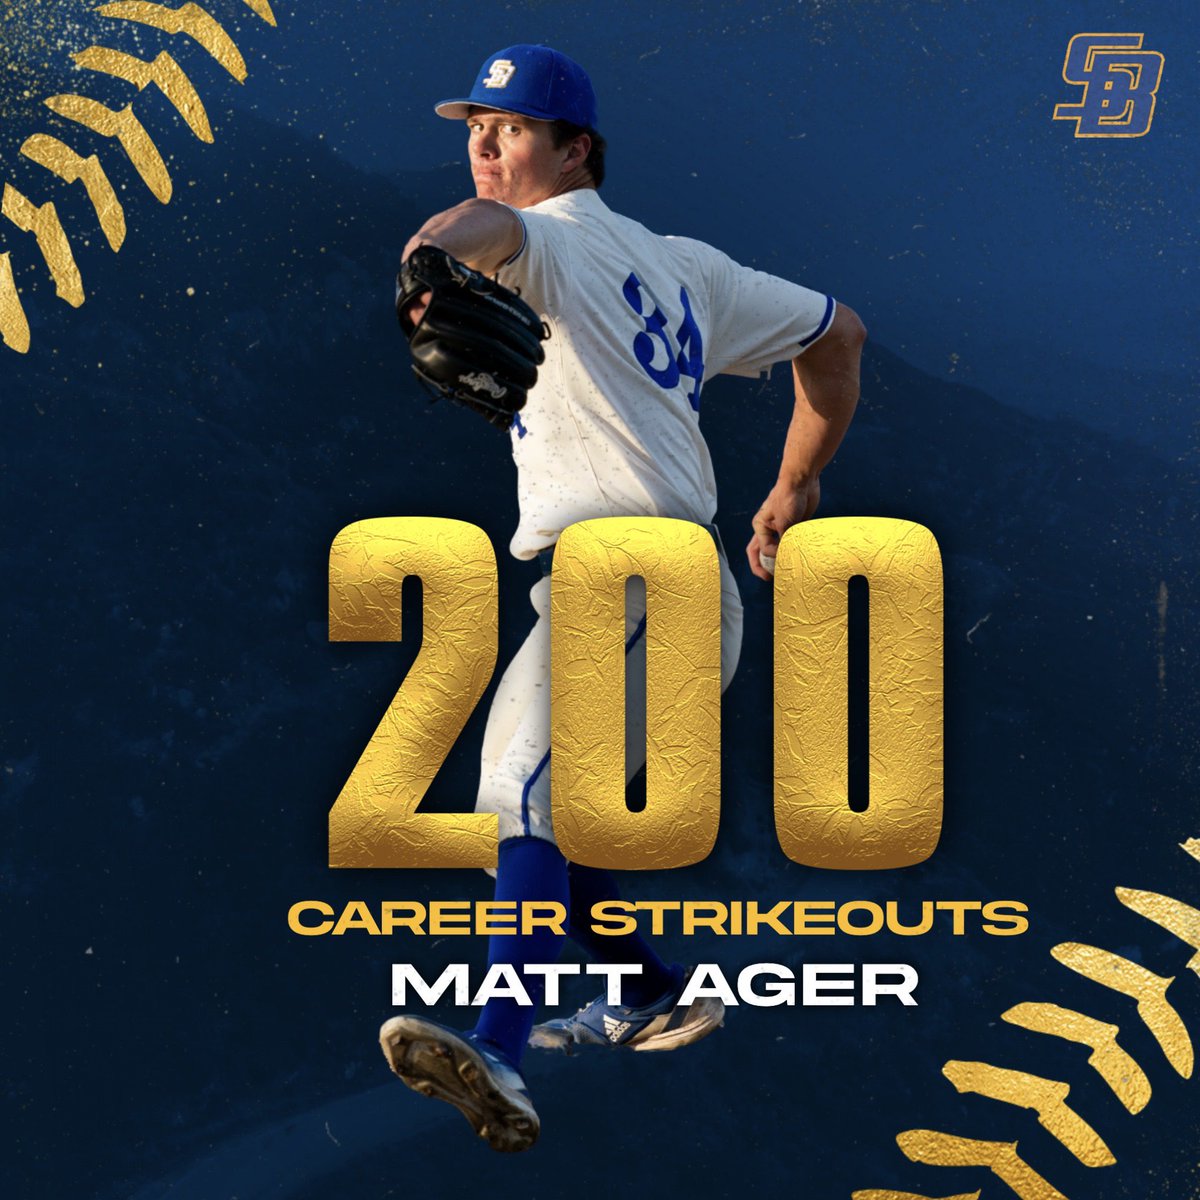 Another Gaucho in the 200 K class! 🏆 Matt Ager secures his 200th career K making him the second Gaucho pitcher tonight to reach such a milestone! #GoChos